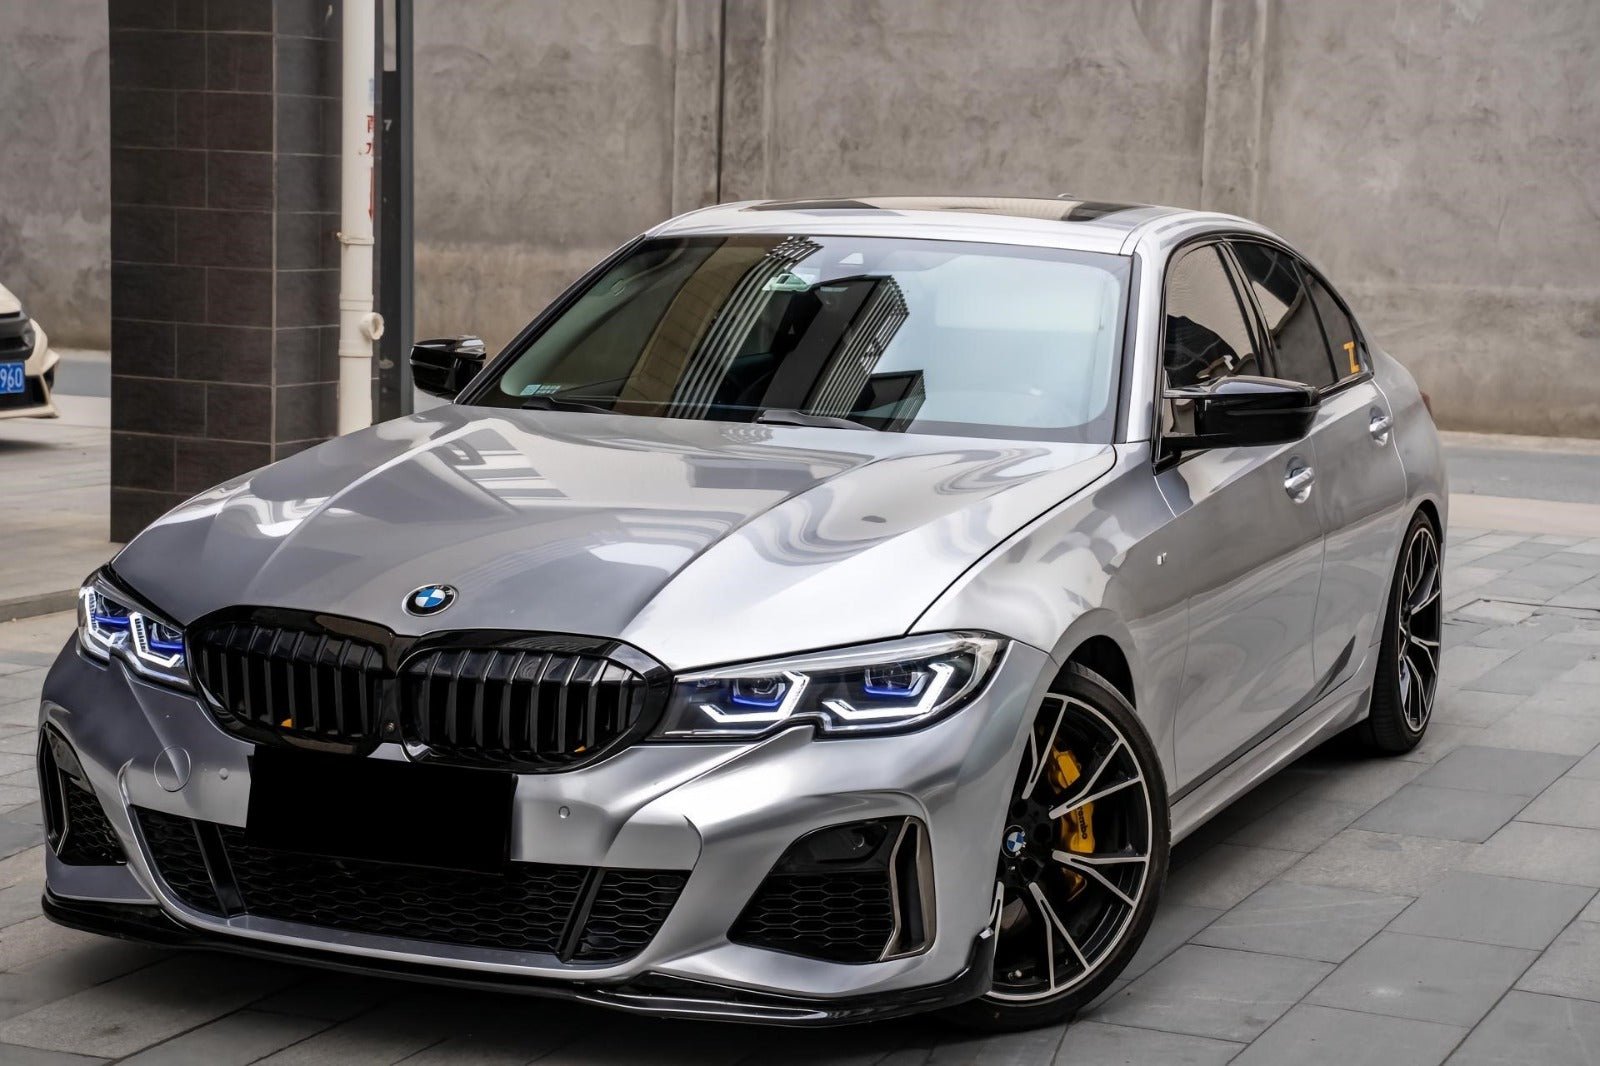 3 SERIES (G20) Custom Aftermarket Parts & Quality Accessories